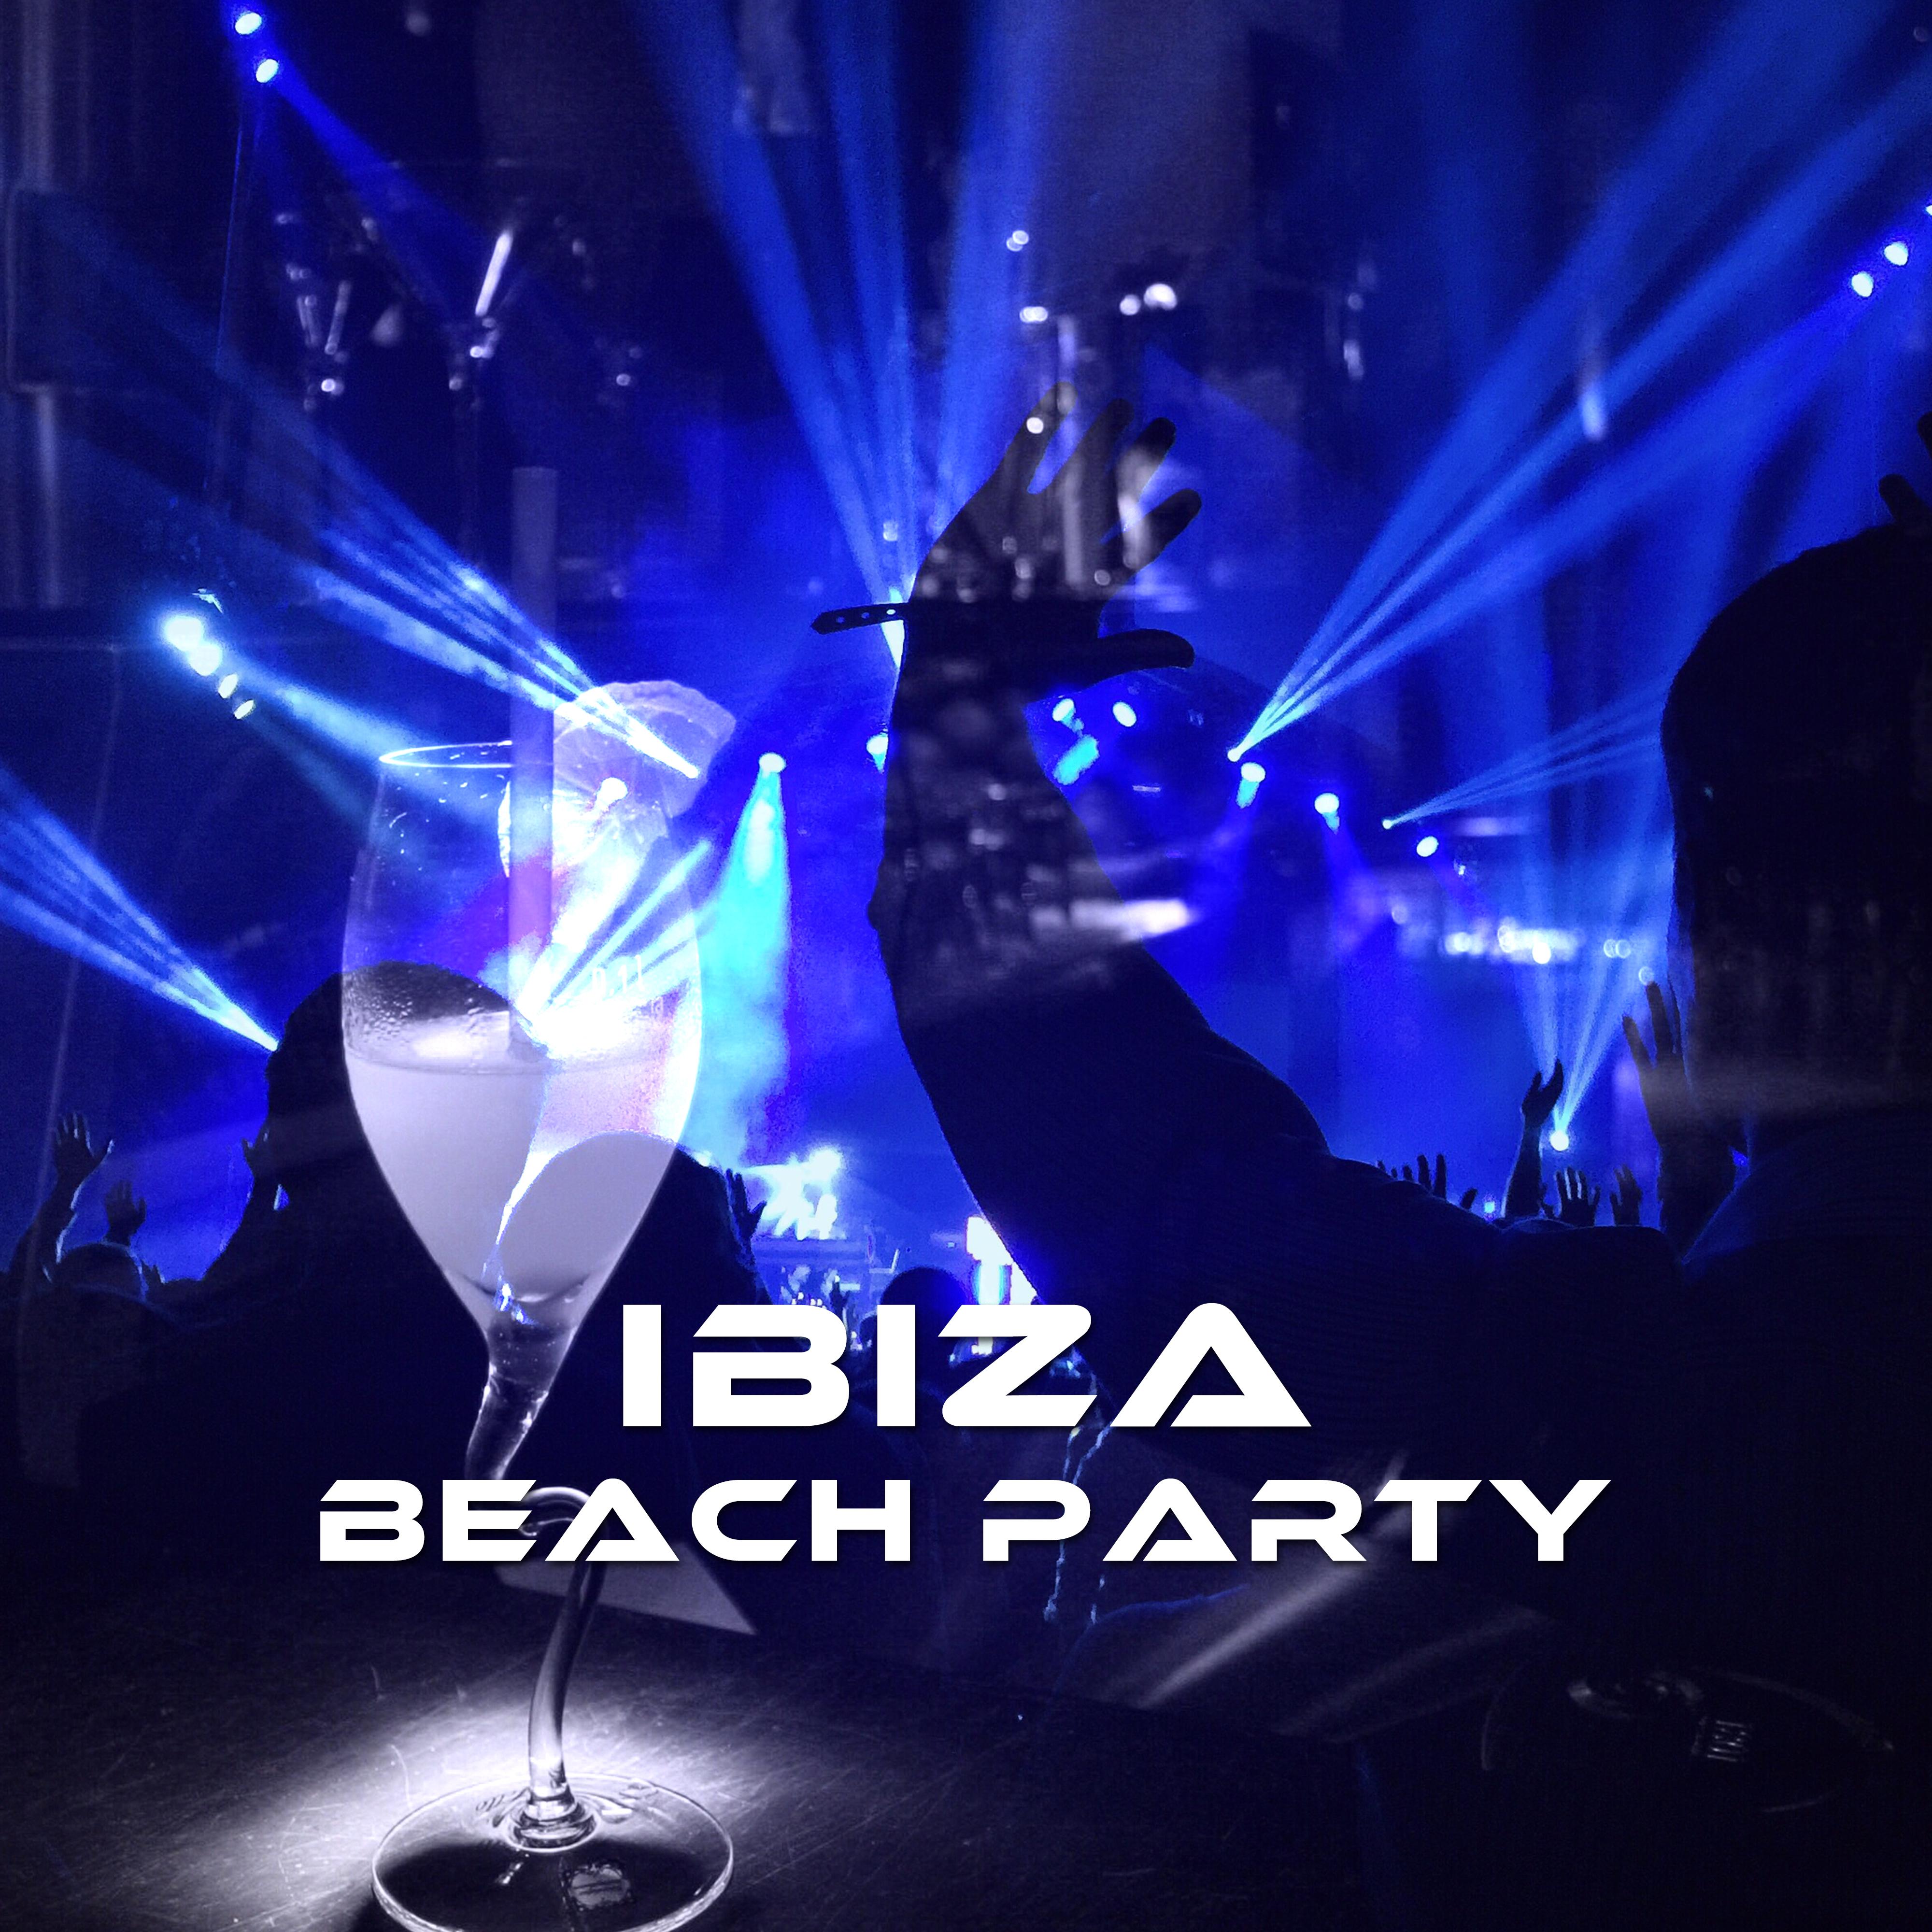 Ibiza Beach Party  Summer Hits, Chill Out Music, Relax, Fiesta, Dance Music, Hotel Lounge